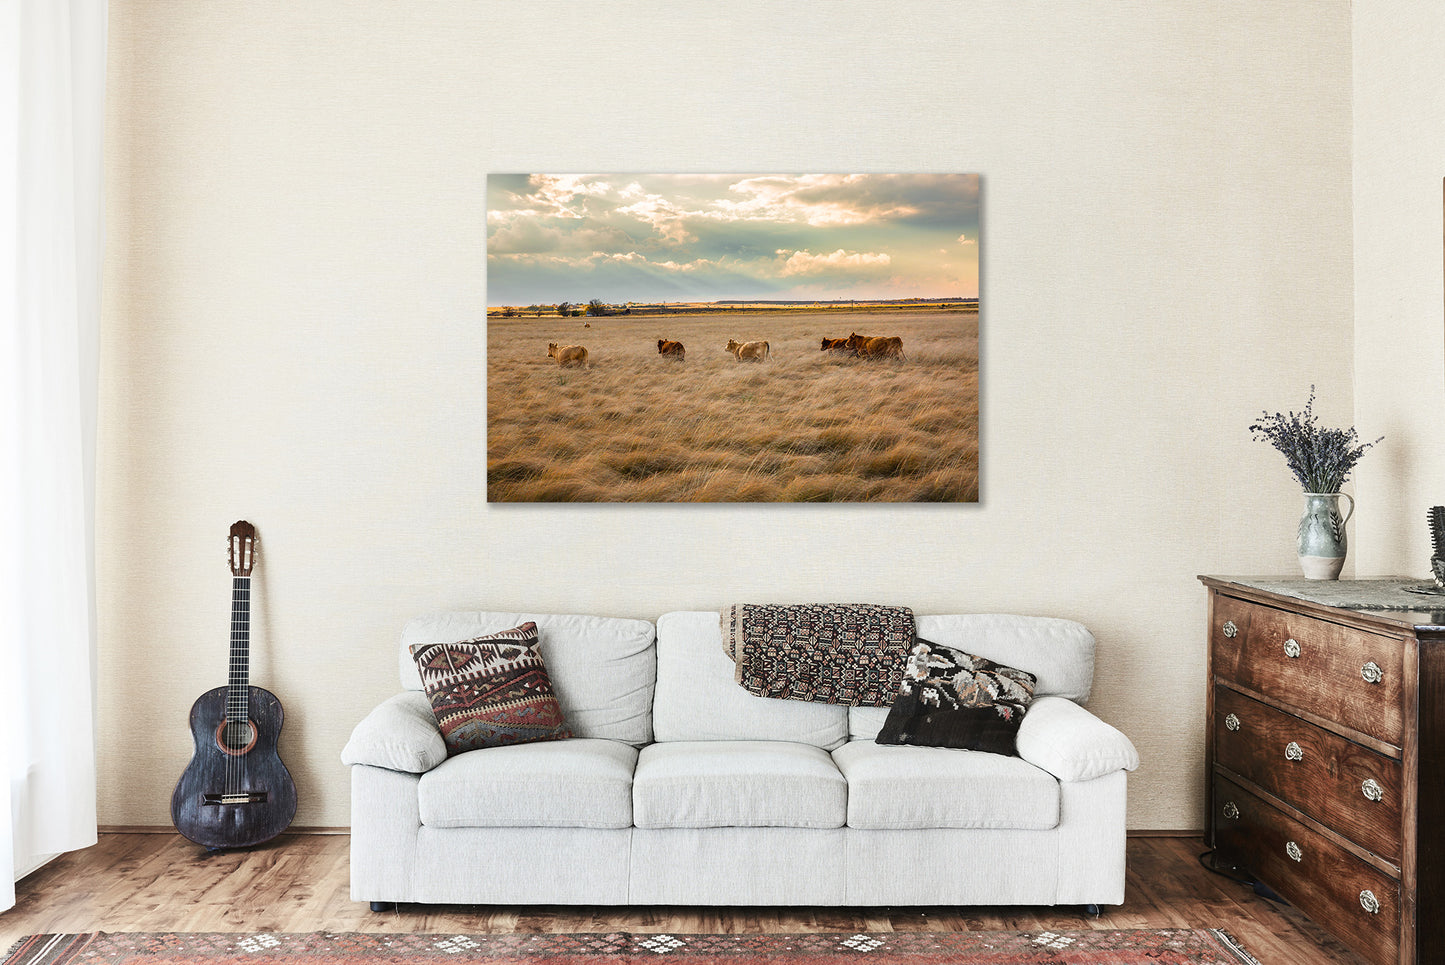 Cow Metal Print | Cattle Herd Photography | Farm and Ranch Wall Art | Texas Photo | Western Decor | Ready to Hang